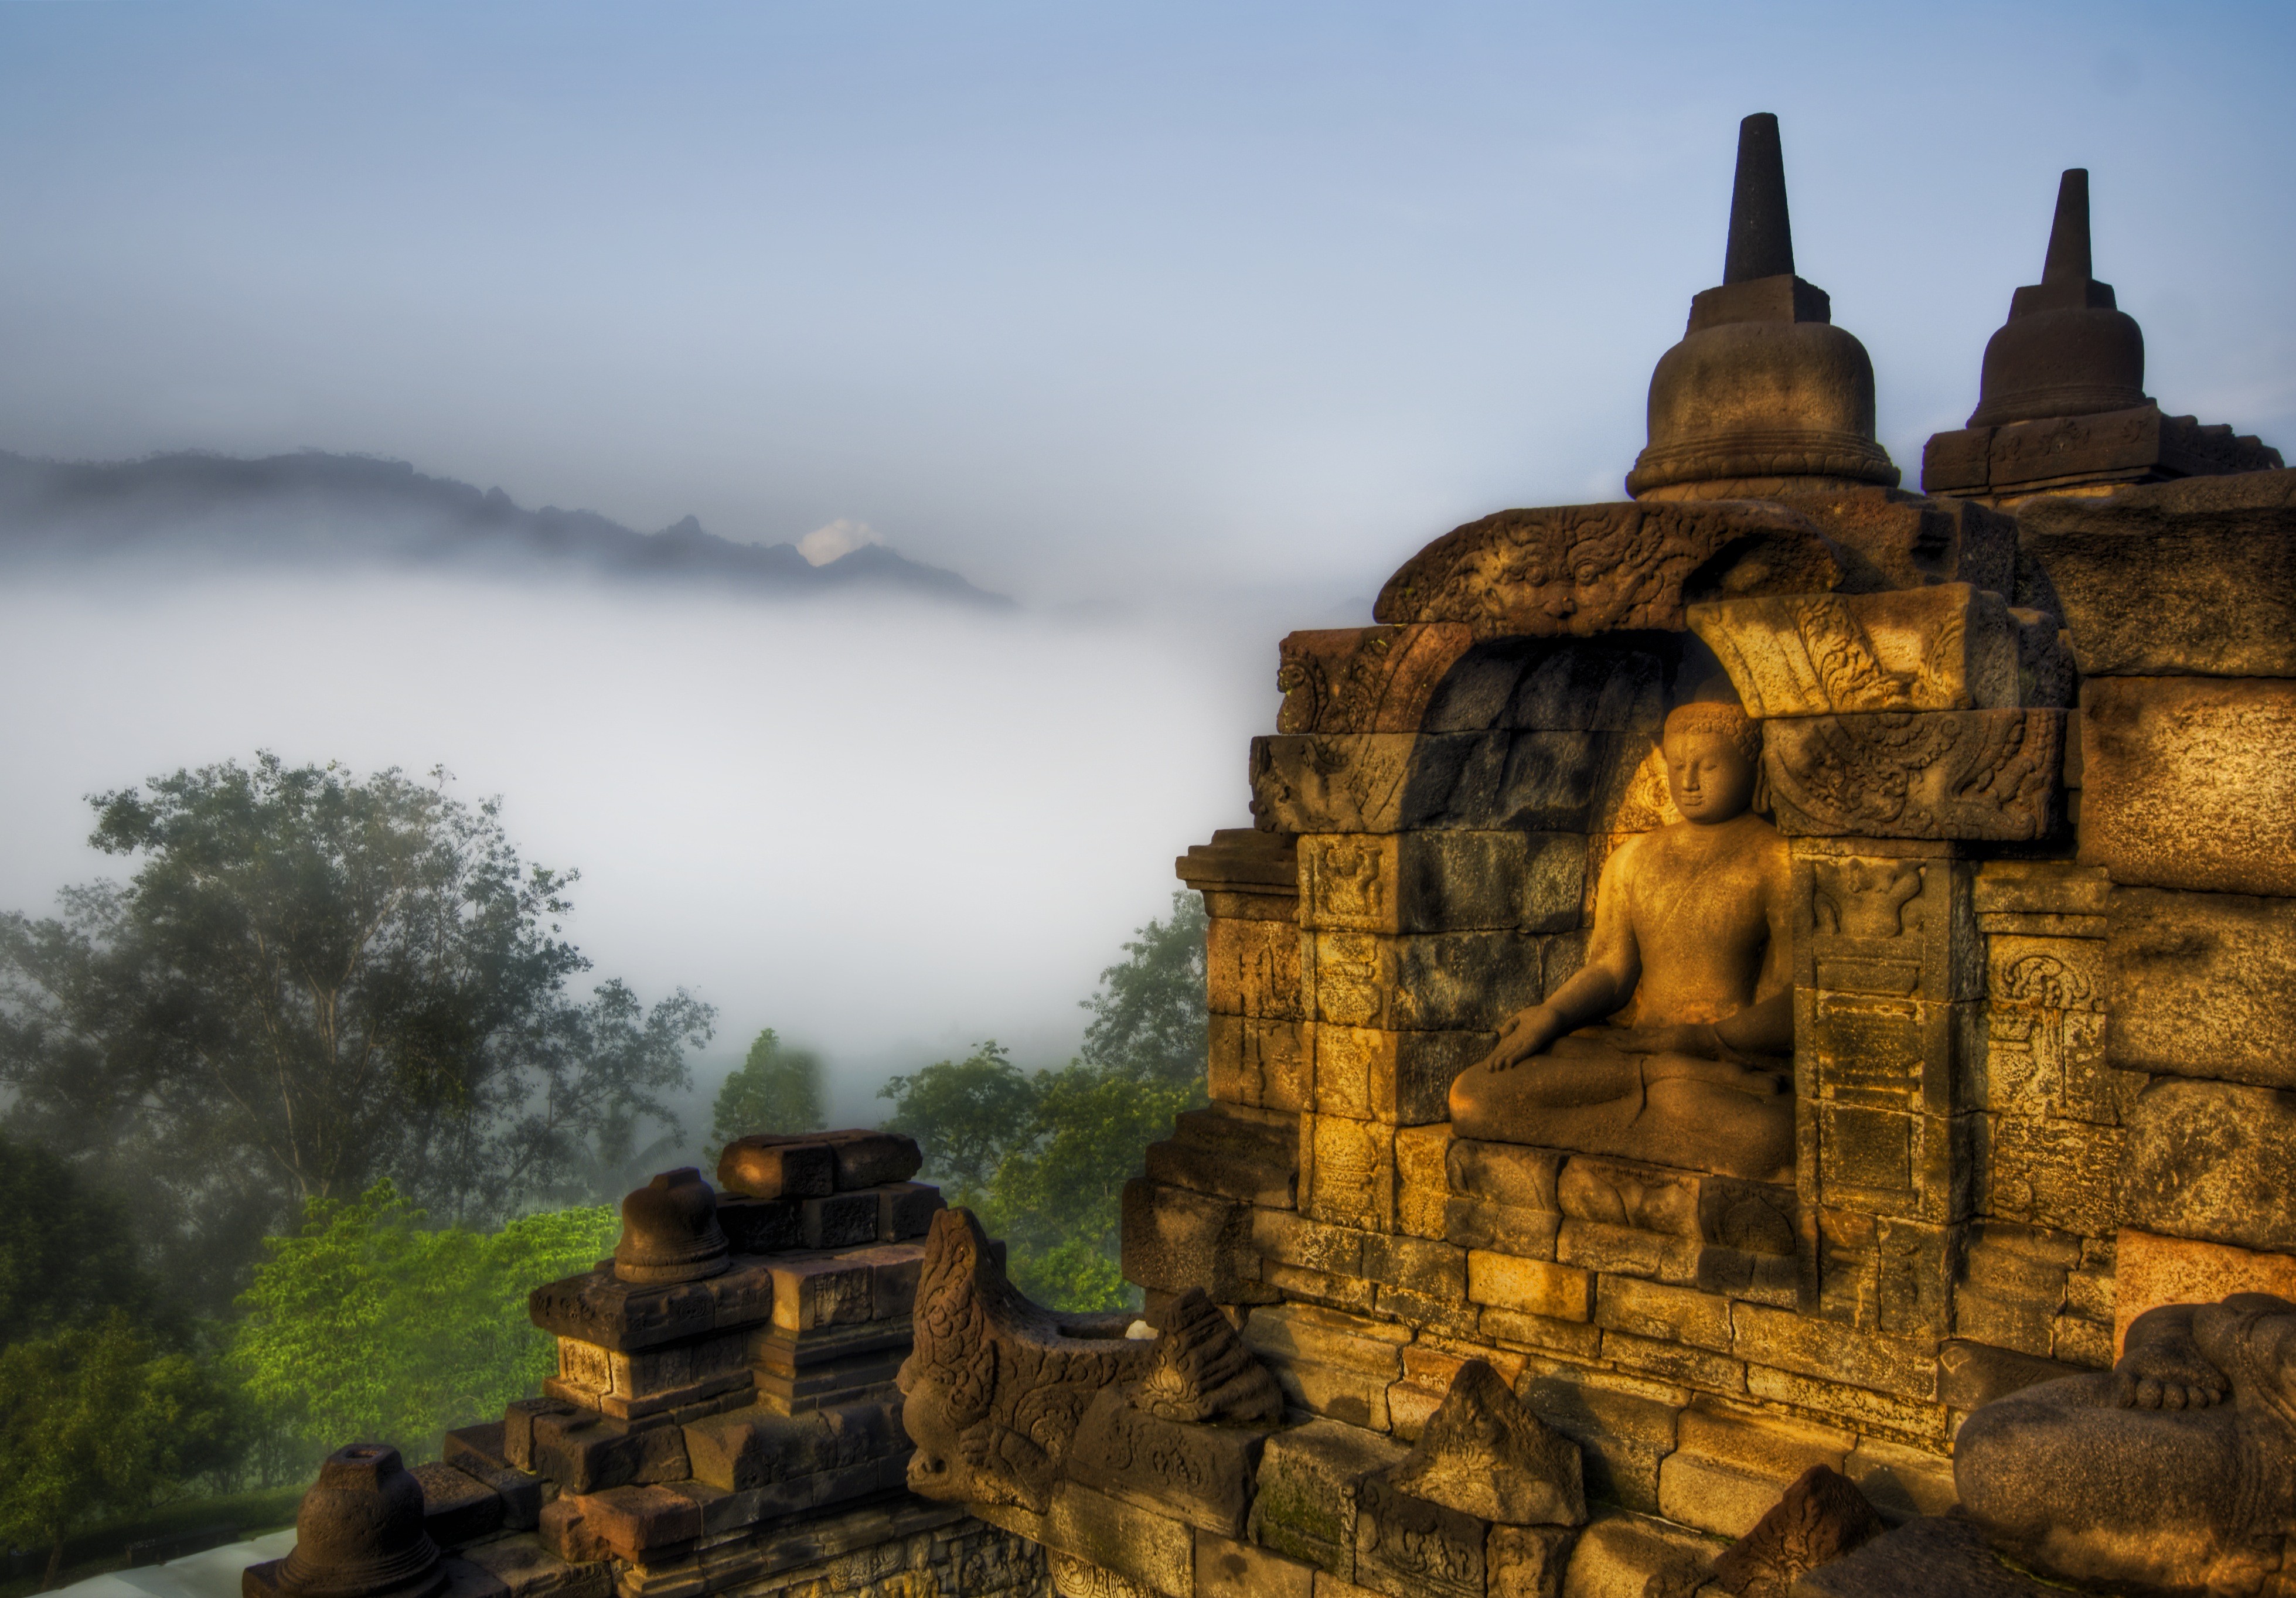 General 3918x2727 architecture religious temple Indonesia Buddha Buddhism HDR trees mountains mist stones sculpture meditation calm